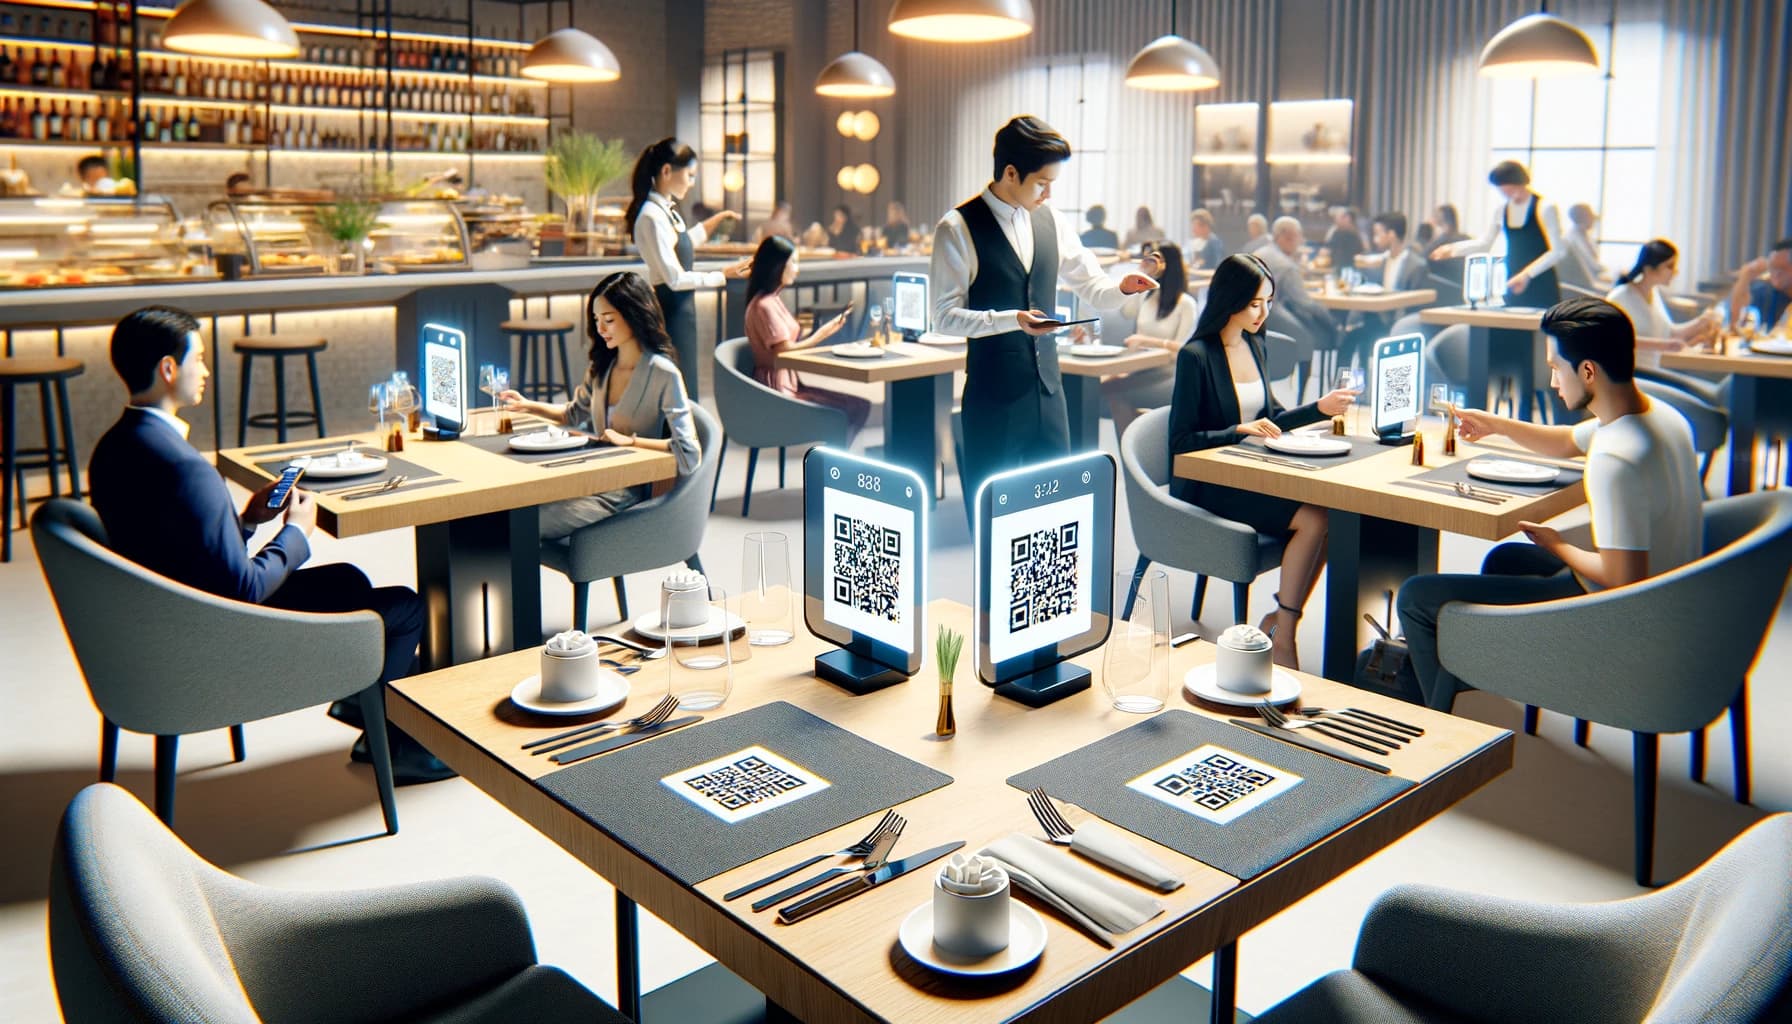 Patrons in a smart restaurant setting using their smartphones to scan QR code menus on digital tabletop stands, with attentive staff and a modern, well-lit ambiance.